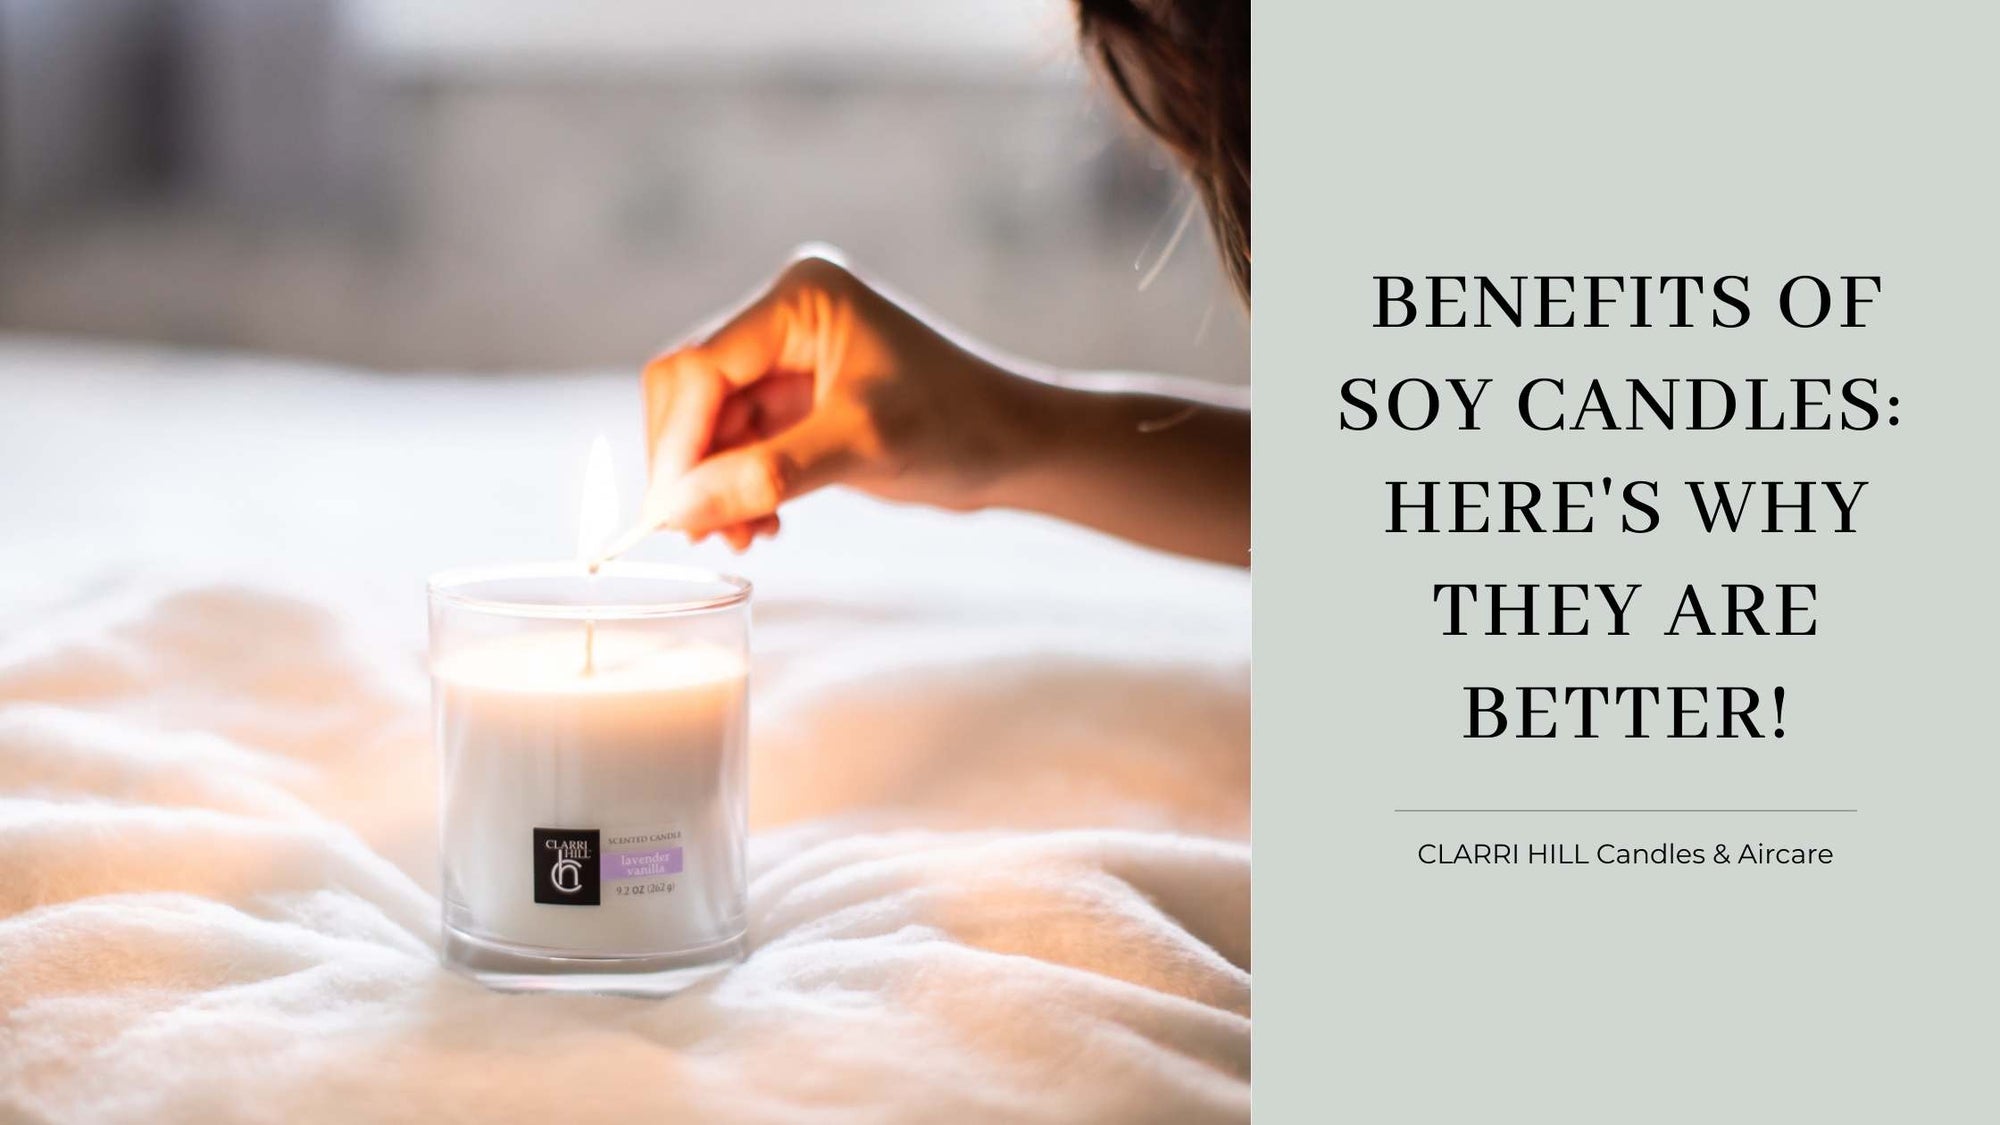 Benefits of Soy Candles: Here's Why They Are Better! | CLARRI HILL